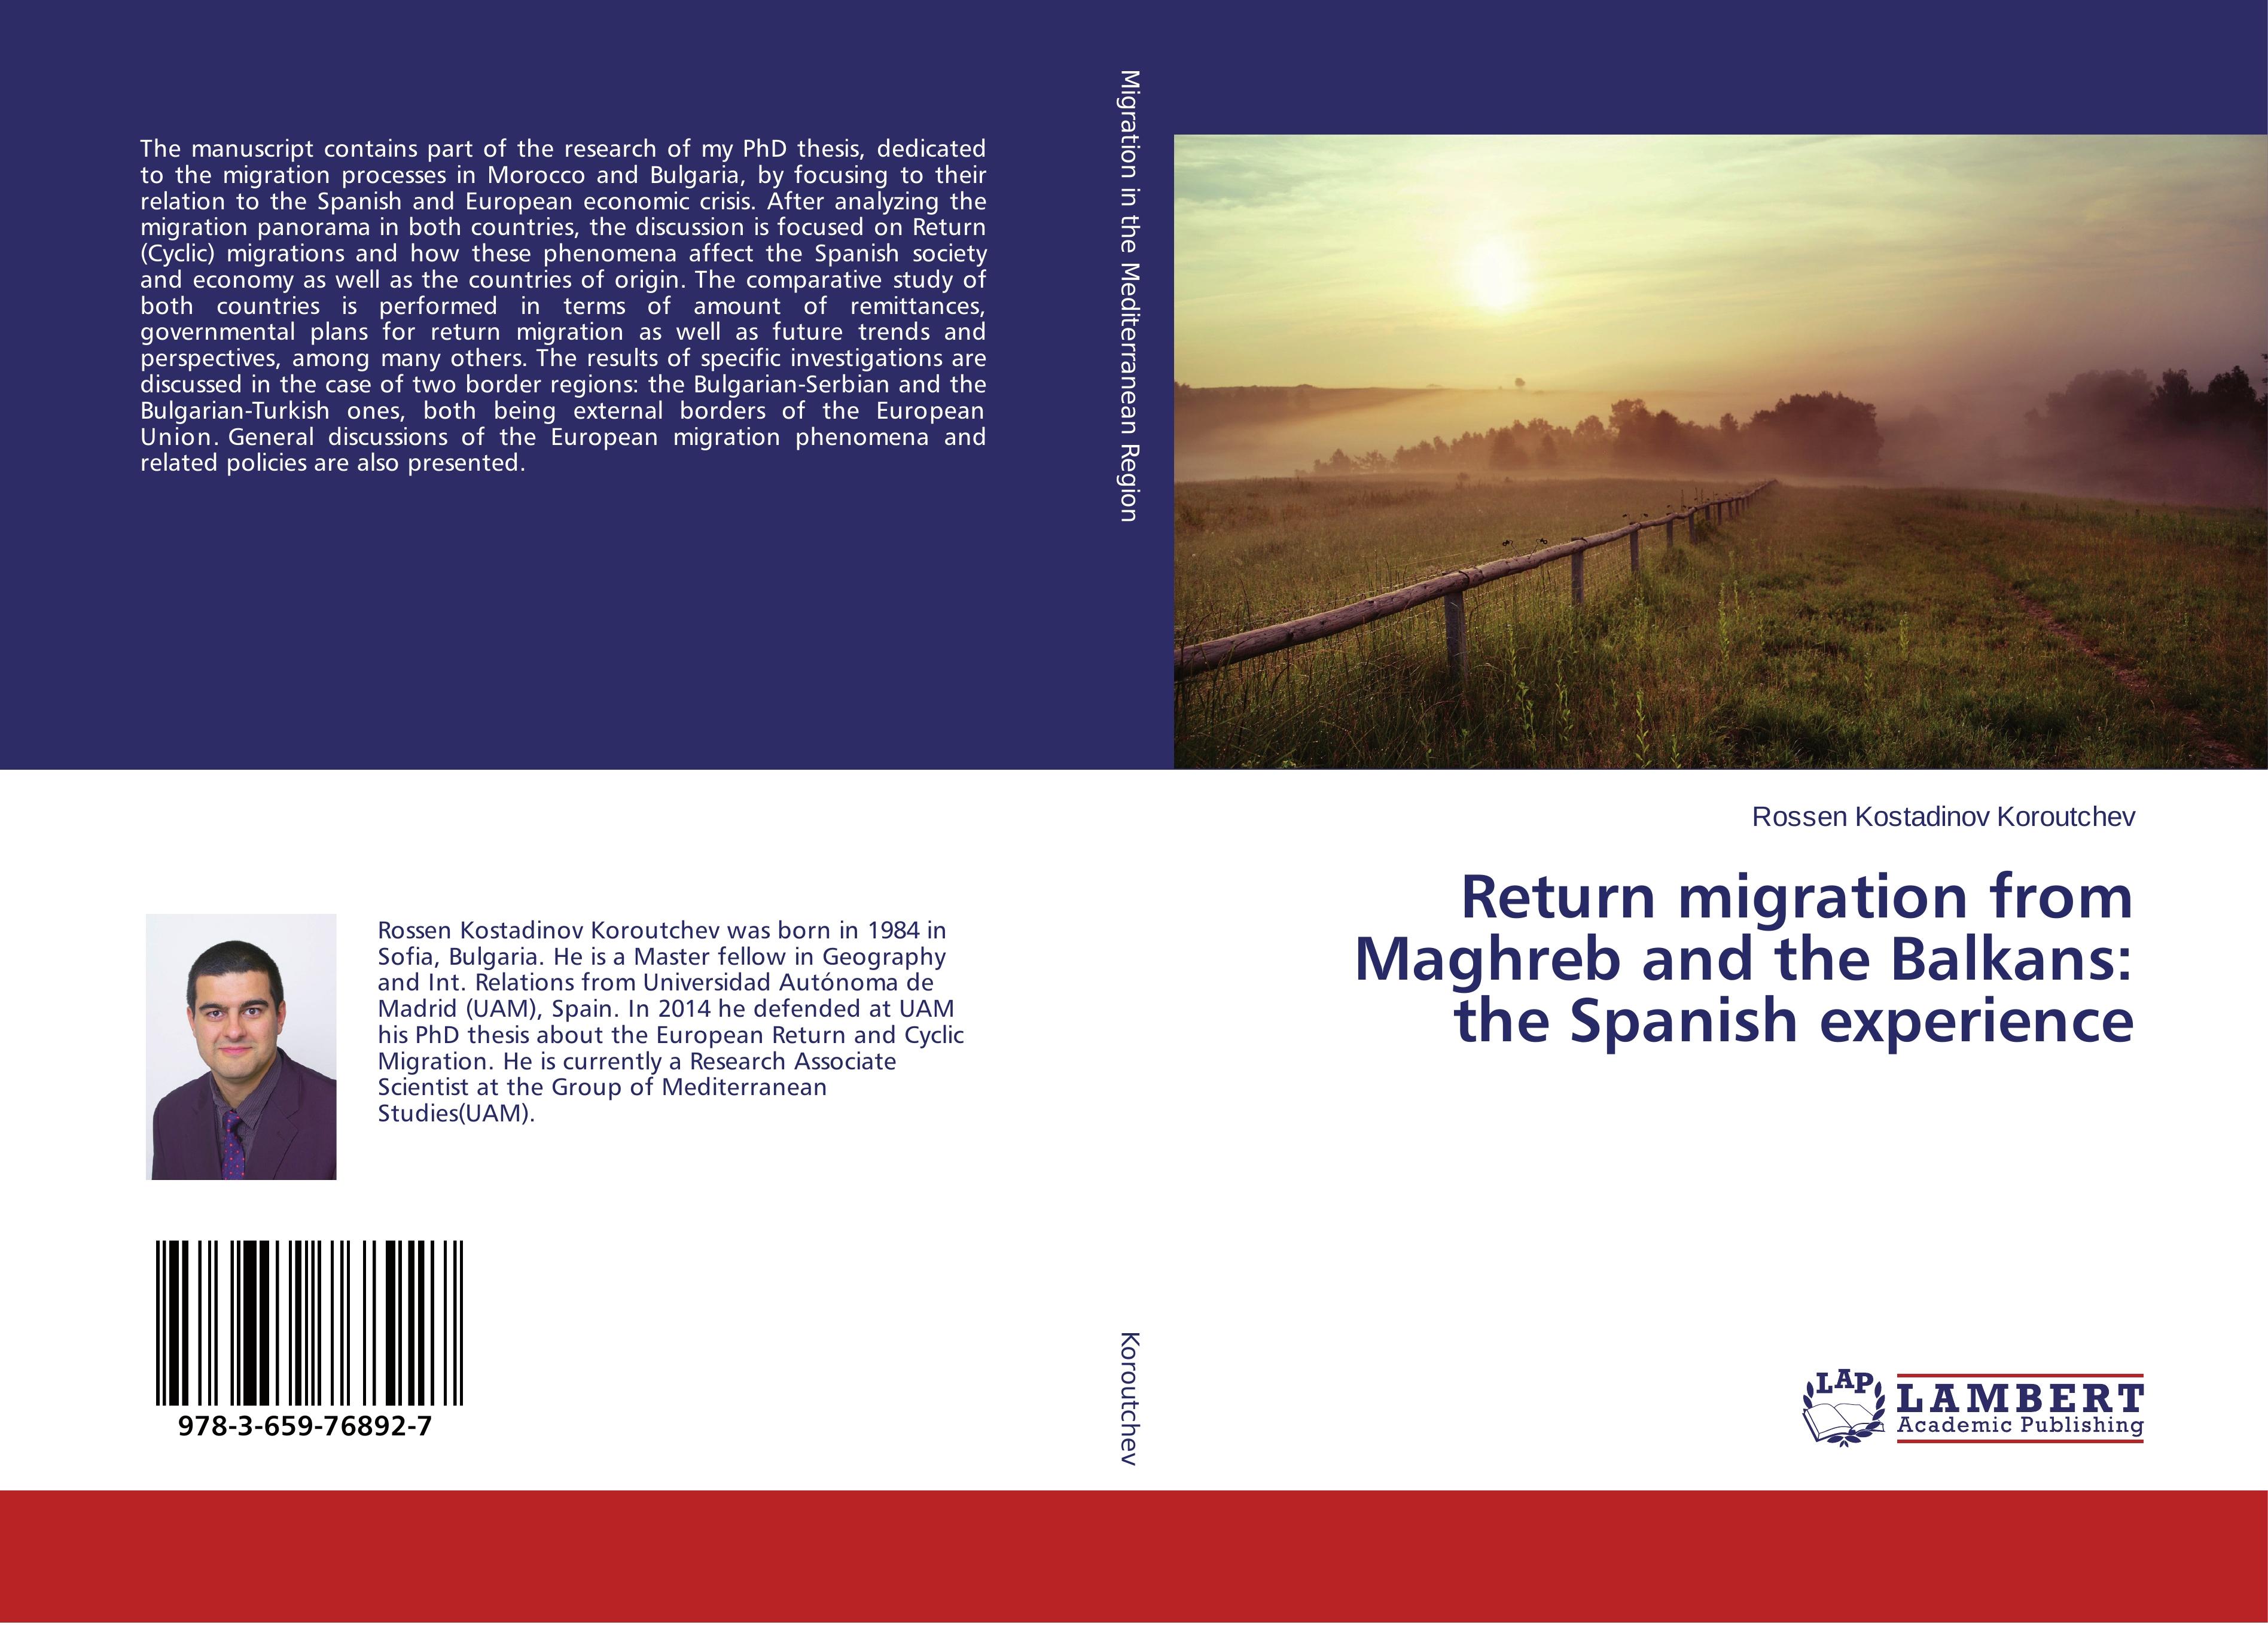 Return migration from Maghreb and the Balkans: the Spanish experience - Rossen Kostadinov Koroutchev